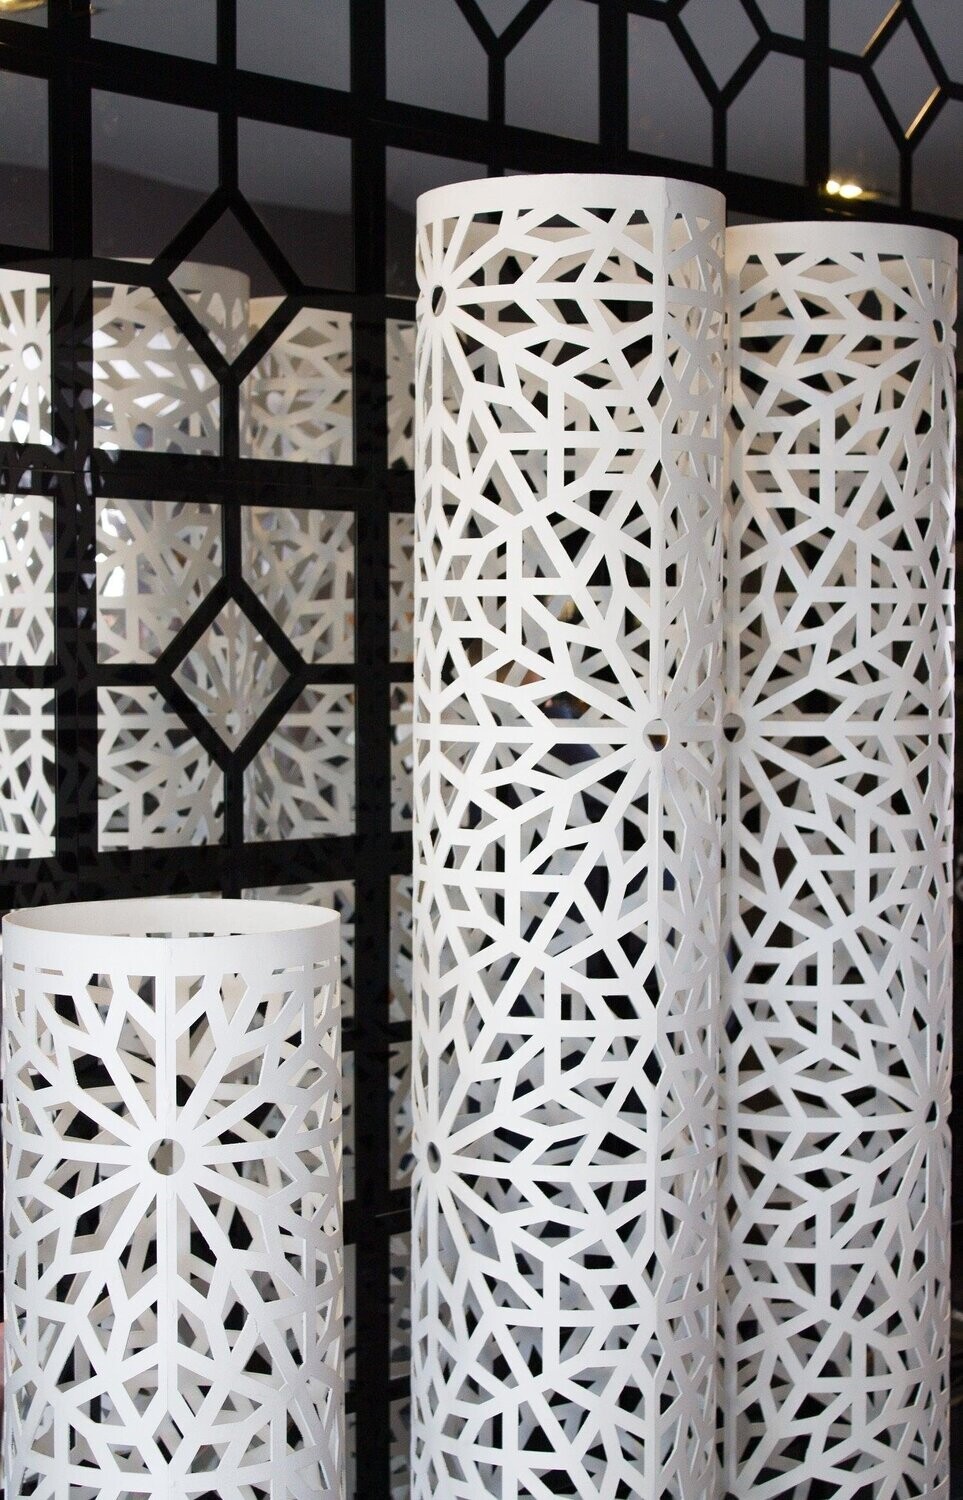 1 x Moucharabiya Decorative Column from £100 - Special Offer (Save up to £300)